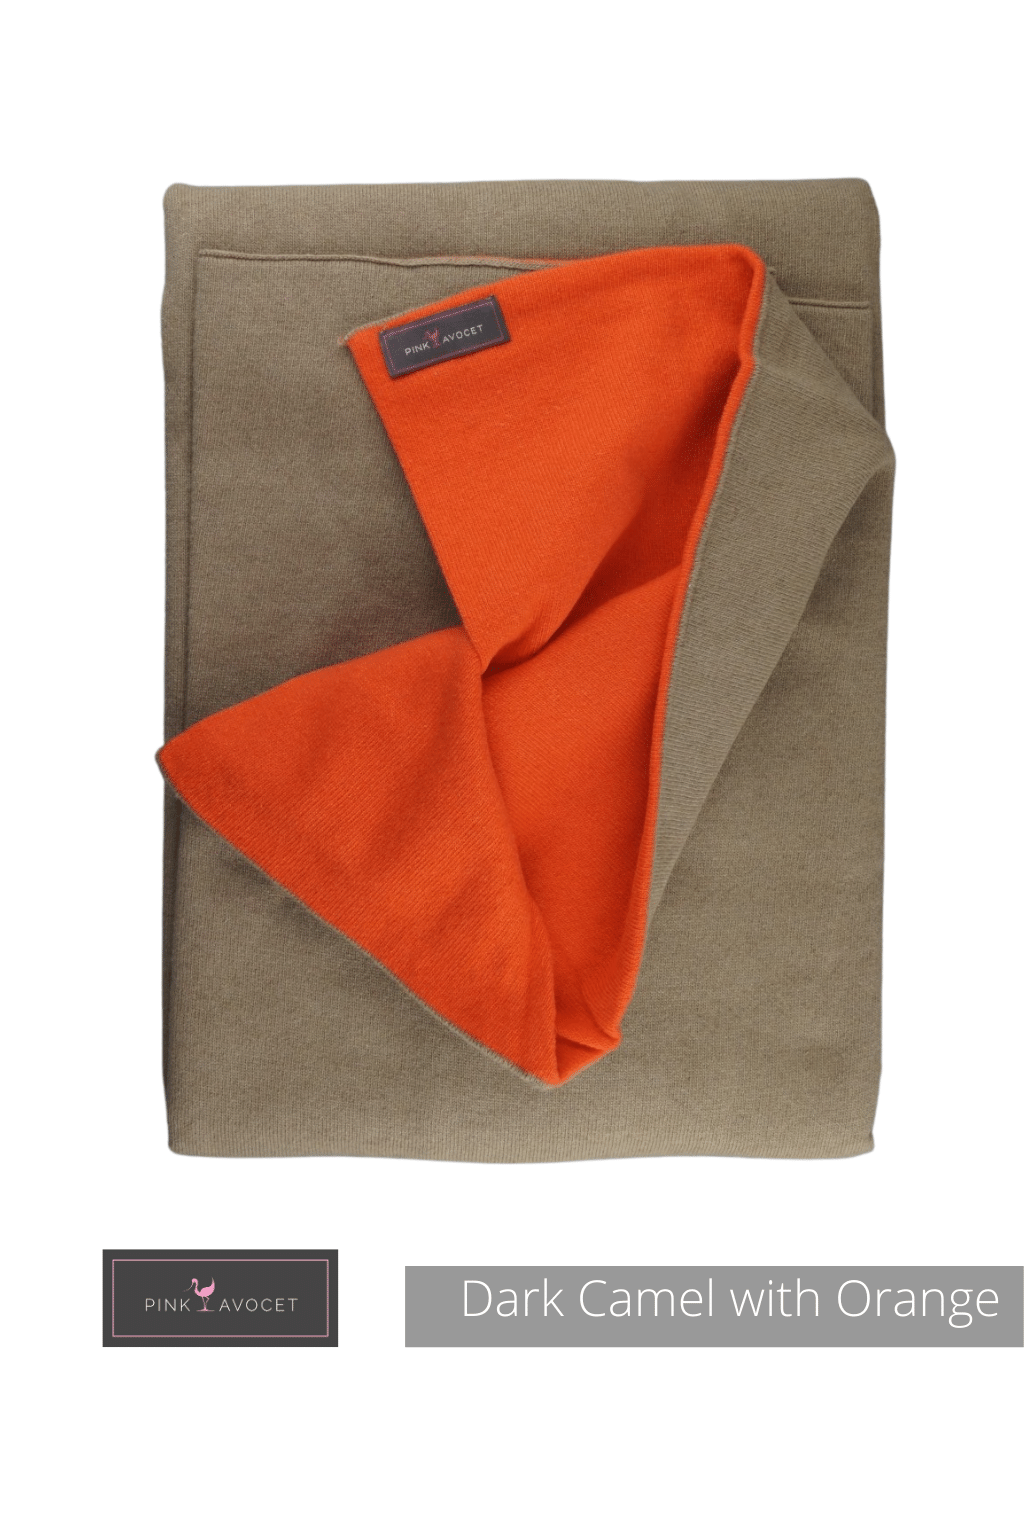 Reversible Double Cashmere Wrap Dark Camel w Orange / One Size by Pink Avocet